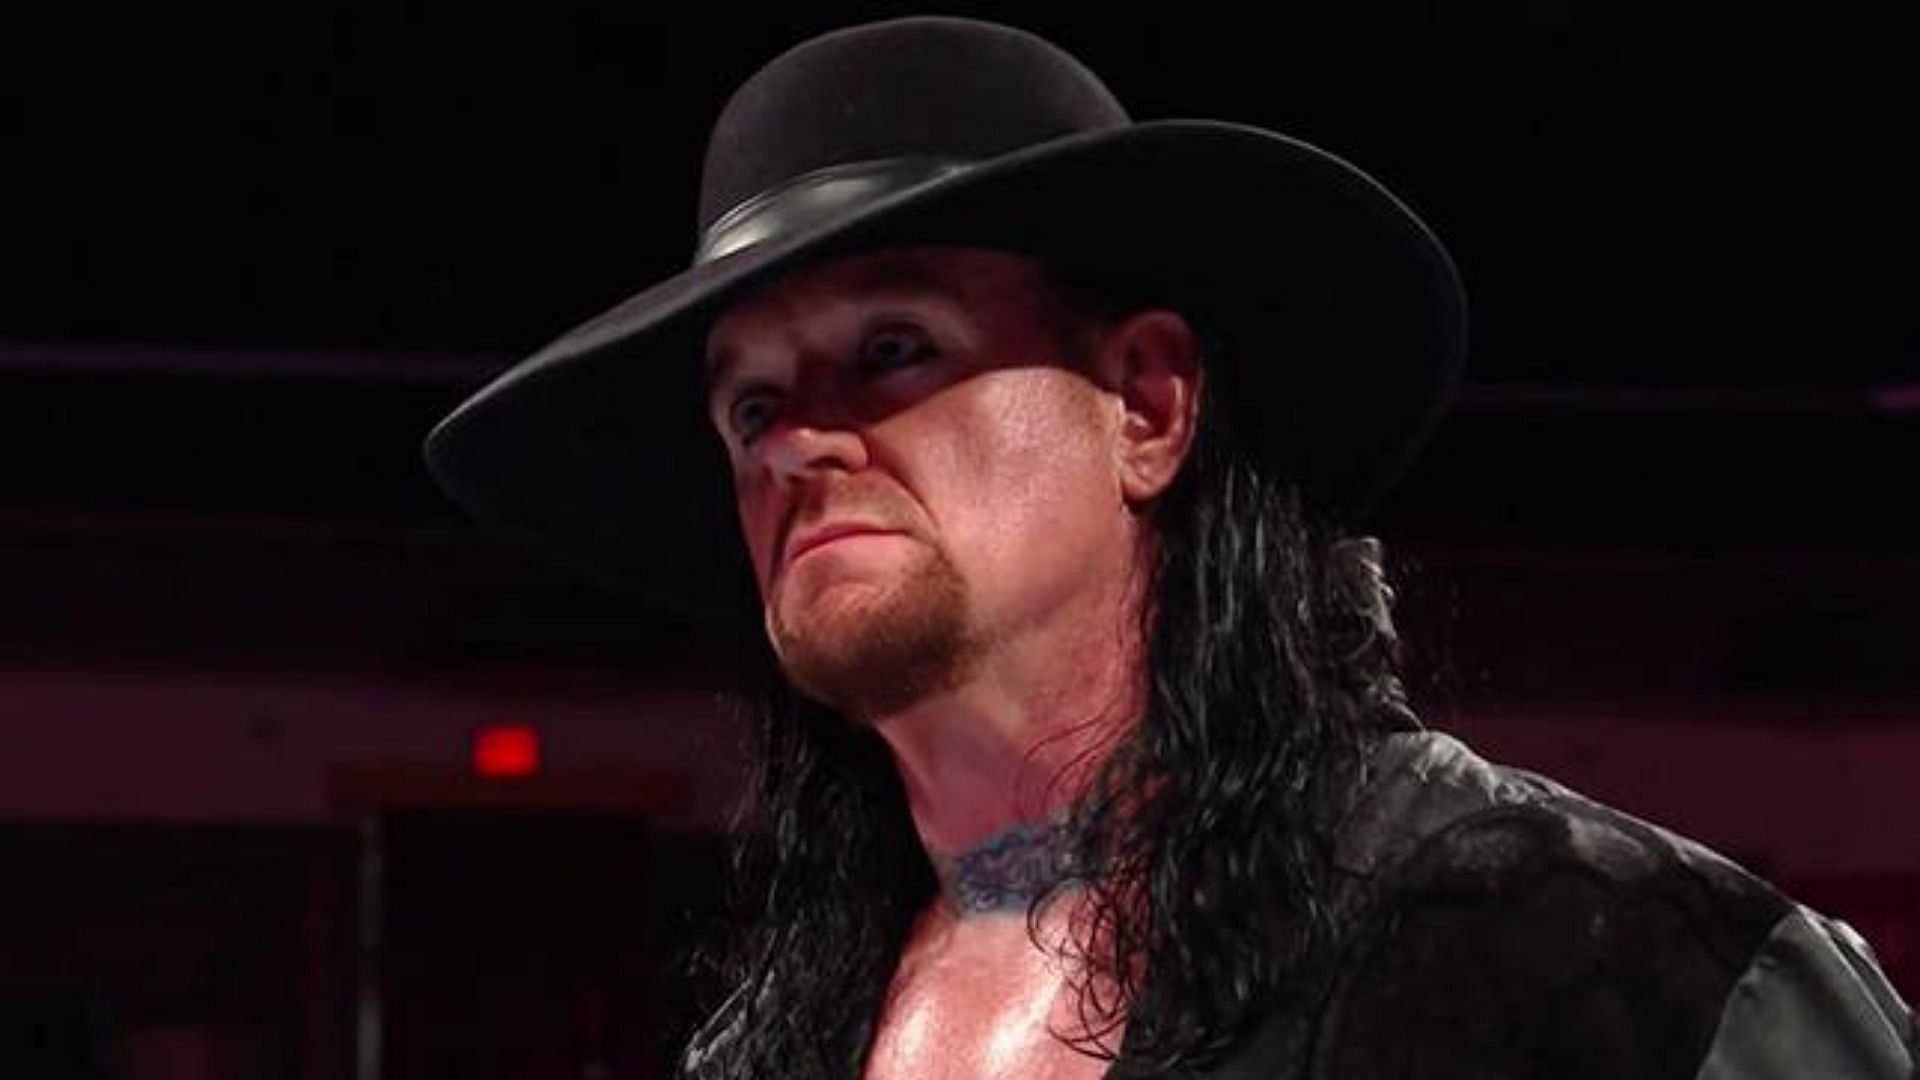 The Undertaker was originally planned to appear at Elimination Chamber